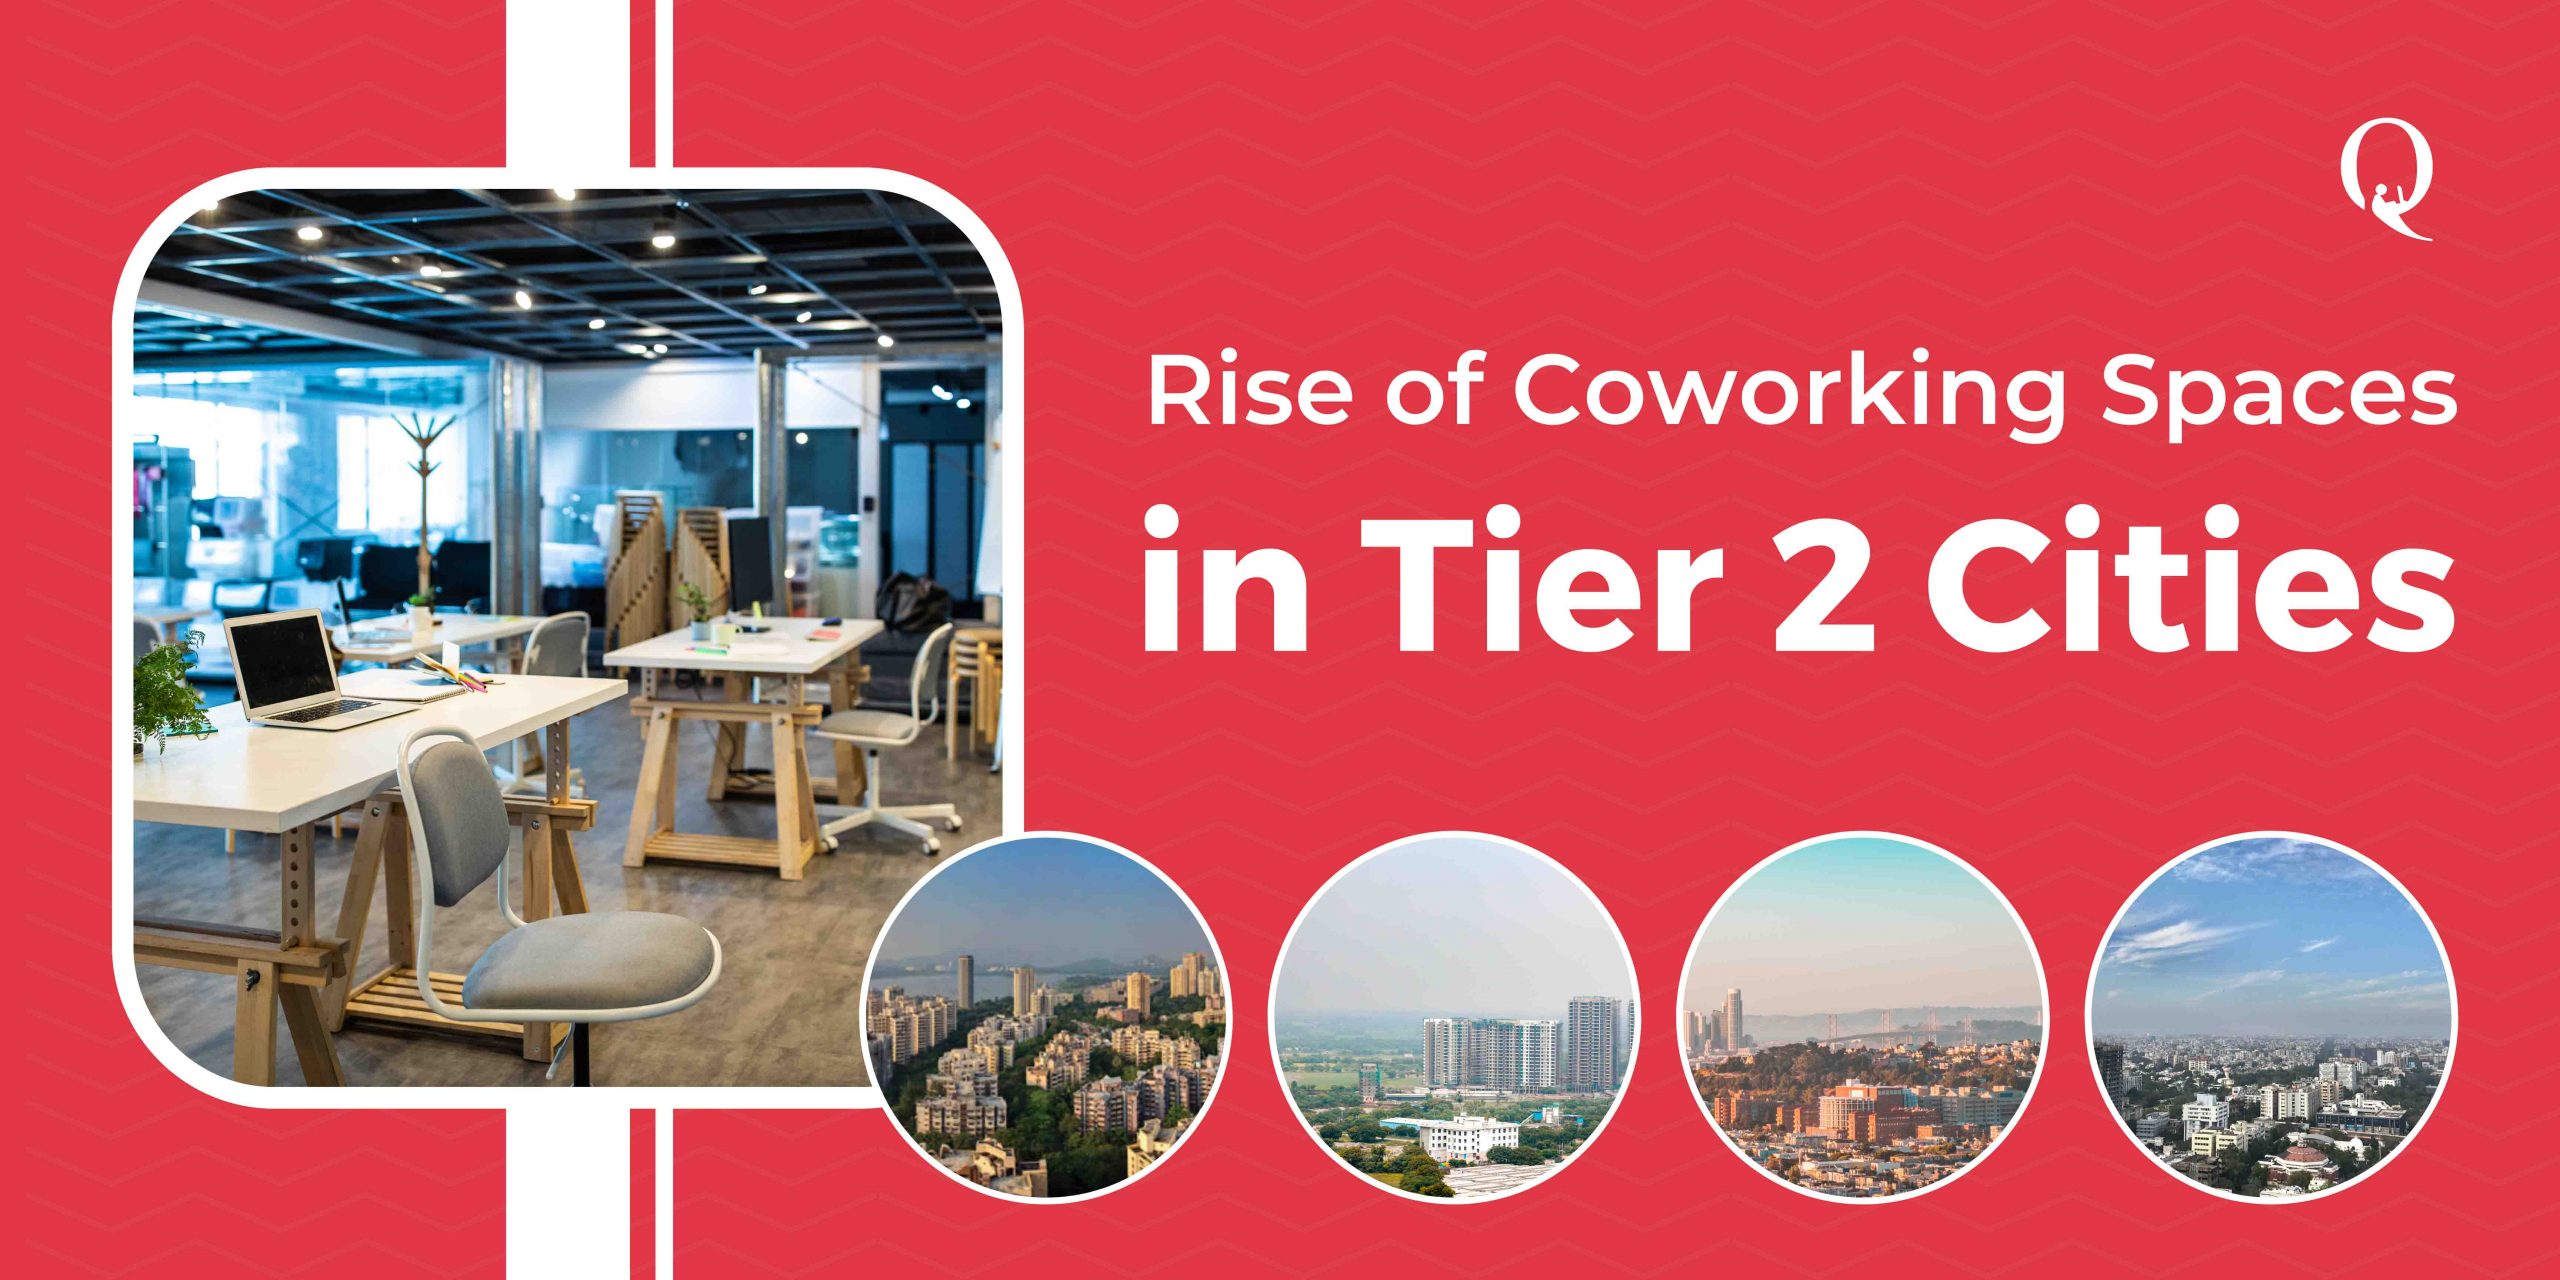 Rise of Coworking Spaces in Tier 2 Cities